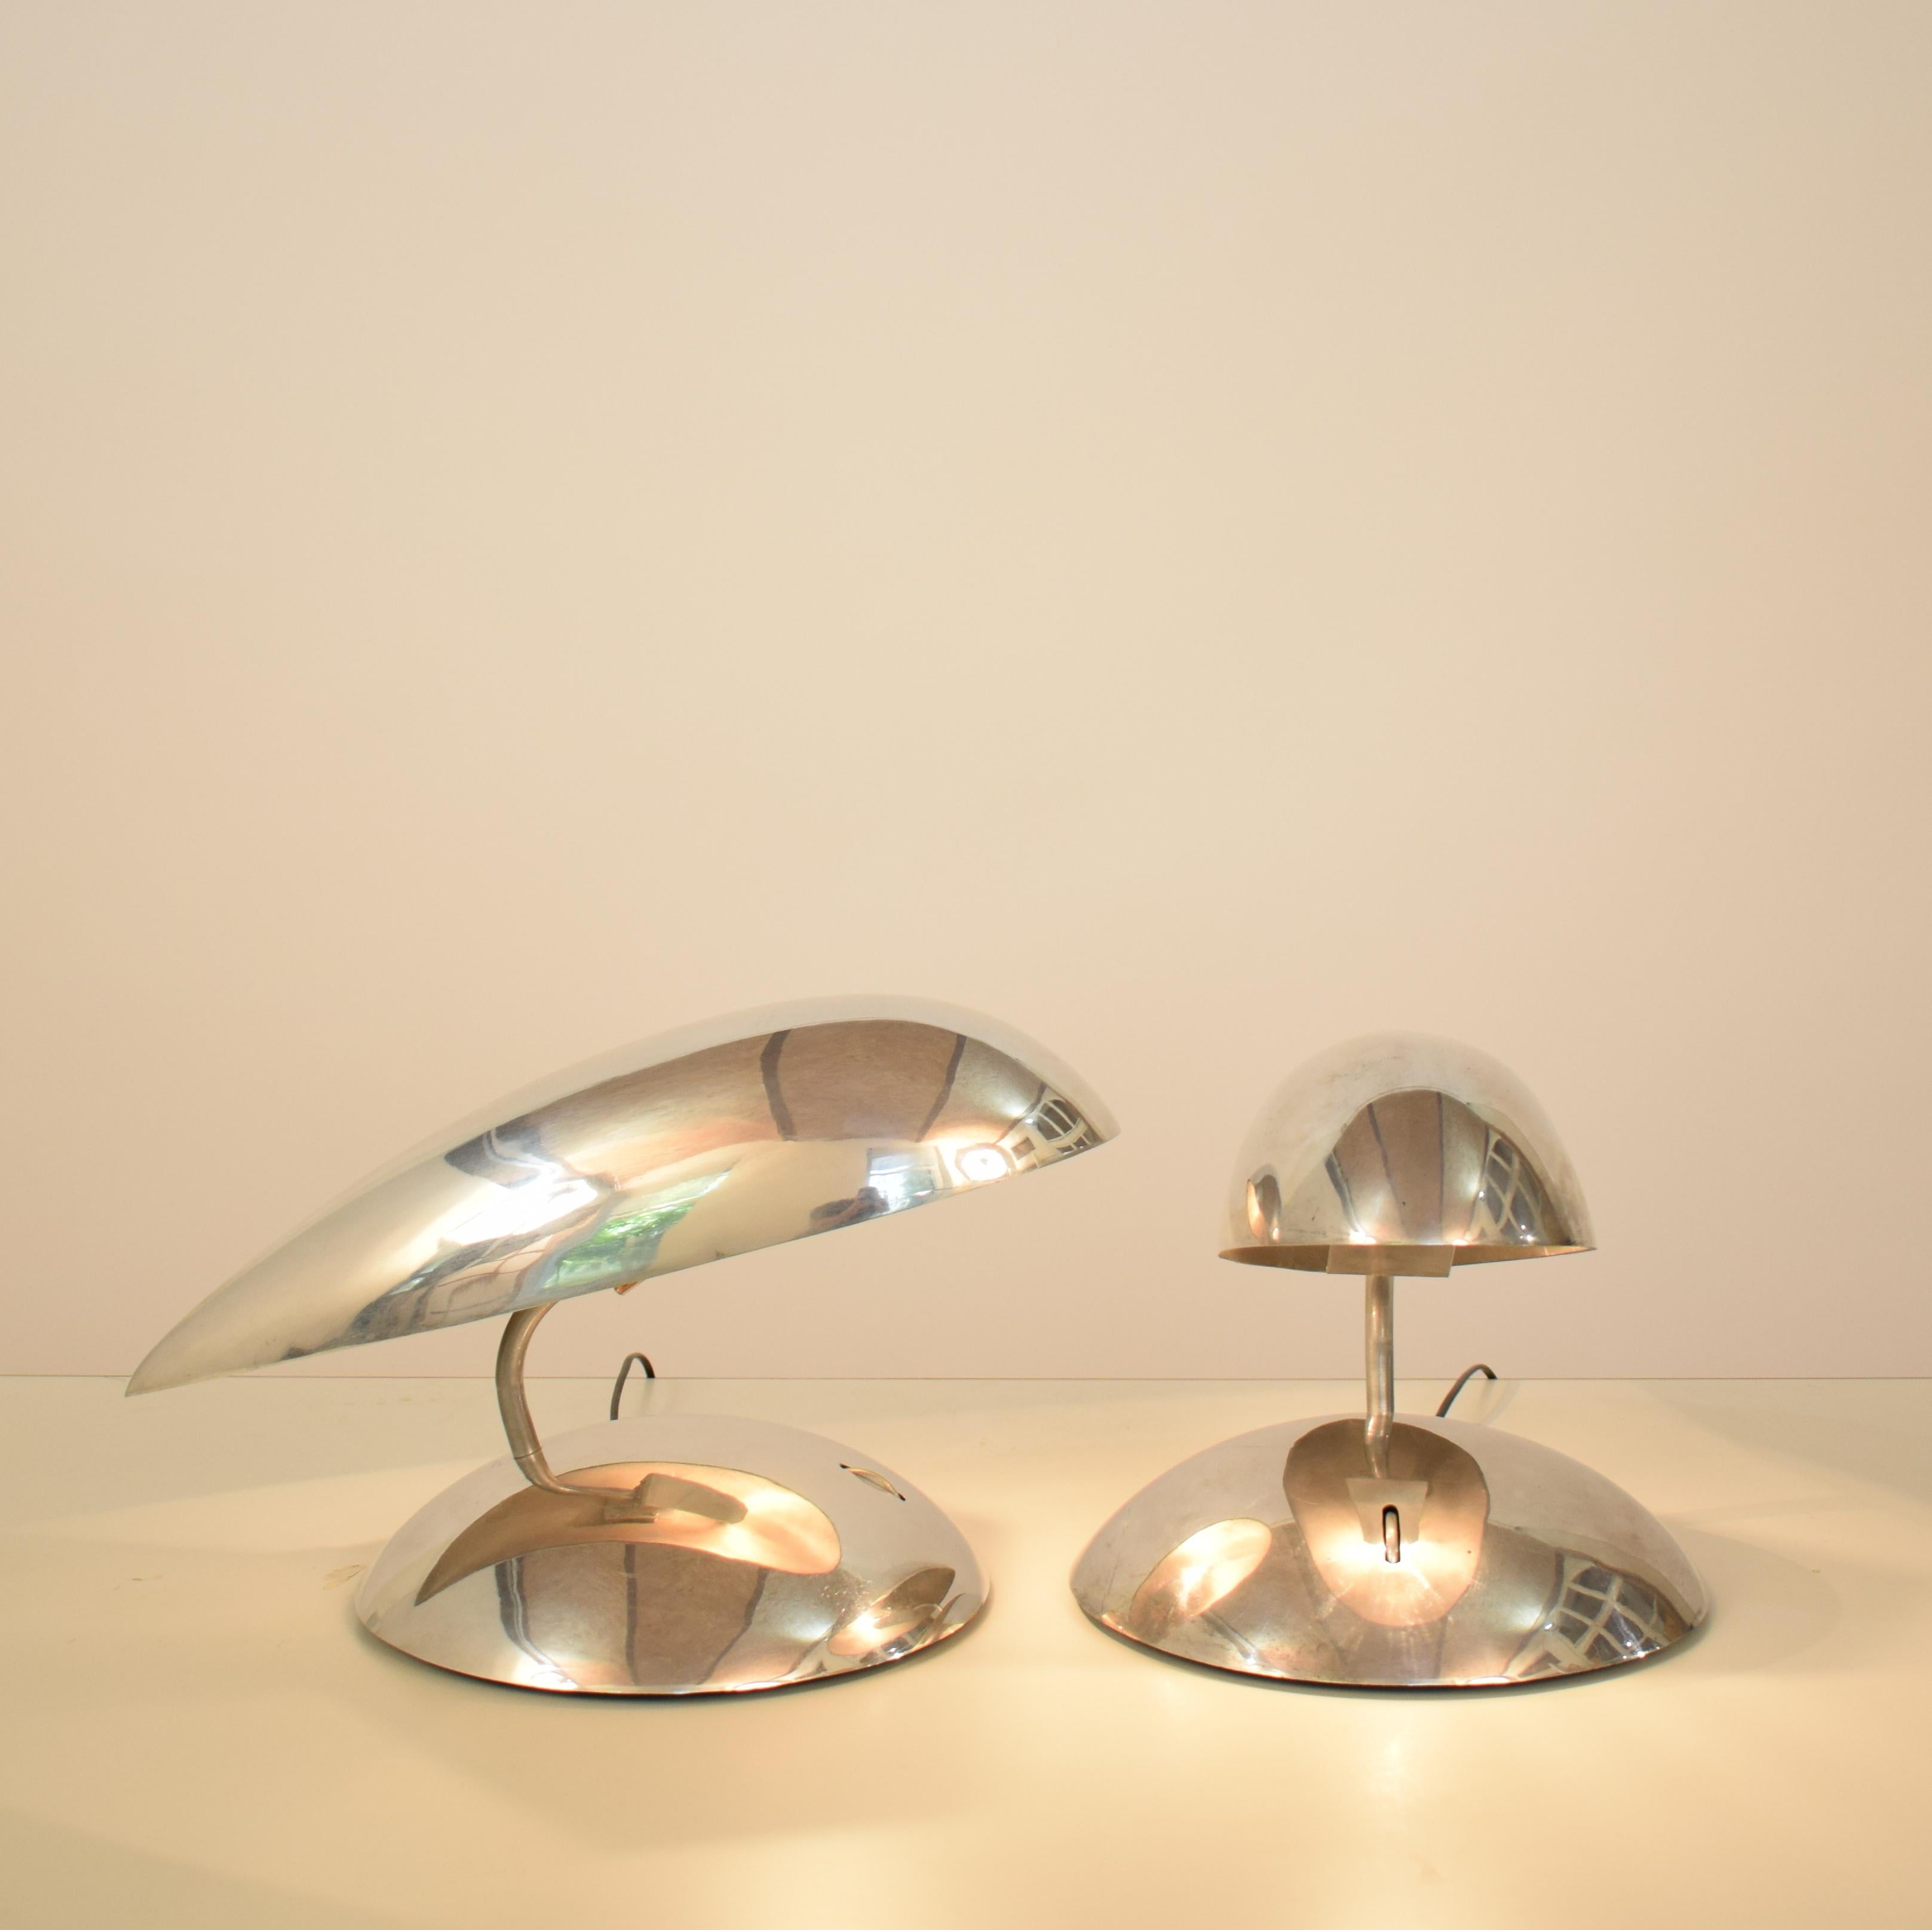 Pair of Polished Aluminium Space Age / Mid Century Table Lamps from the 1980s For Sale 8